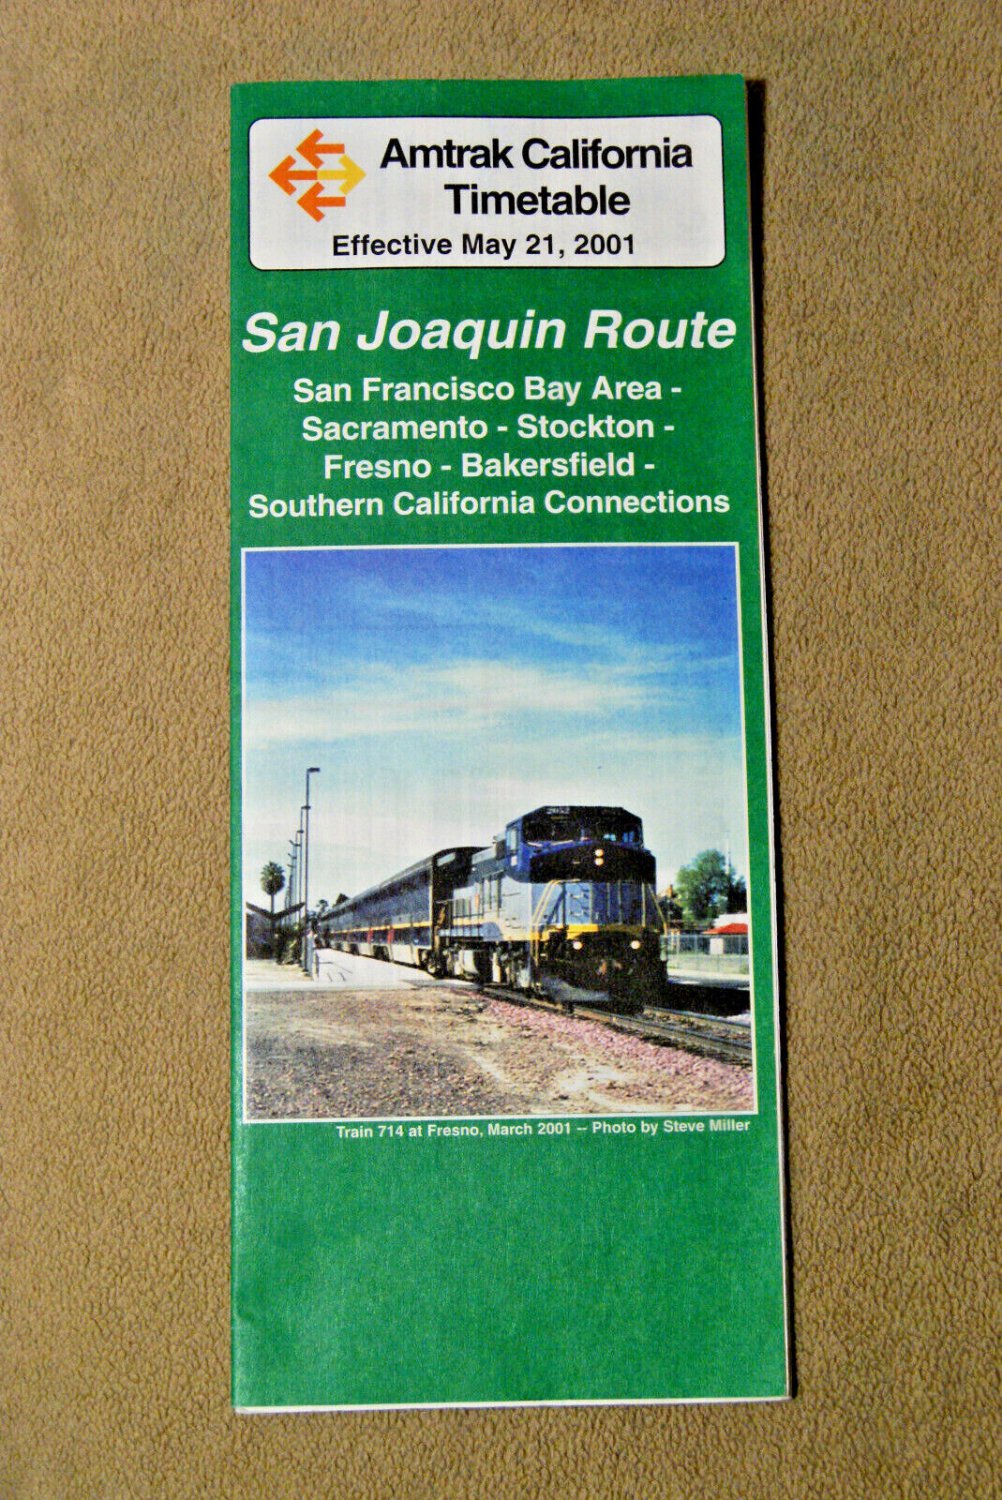 Amtrak Timetable - San Joaquin Route - May 21, 2001